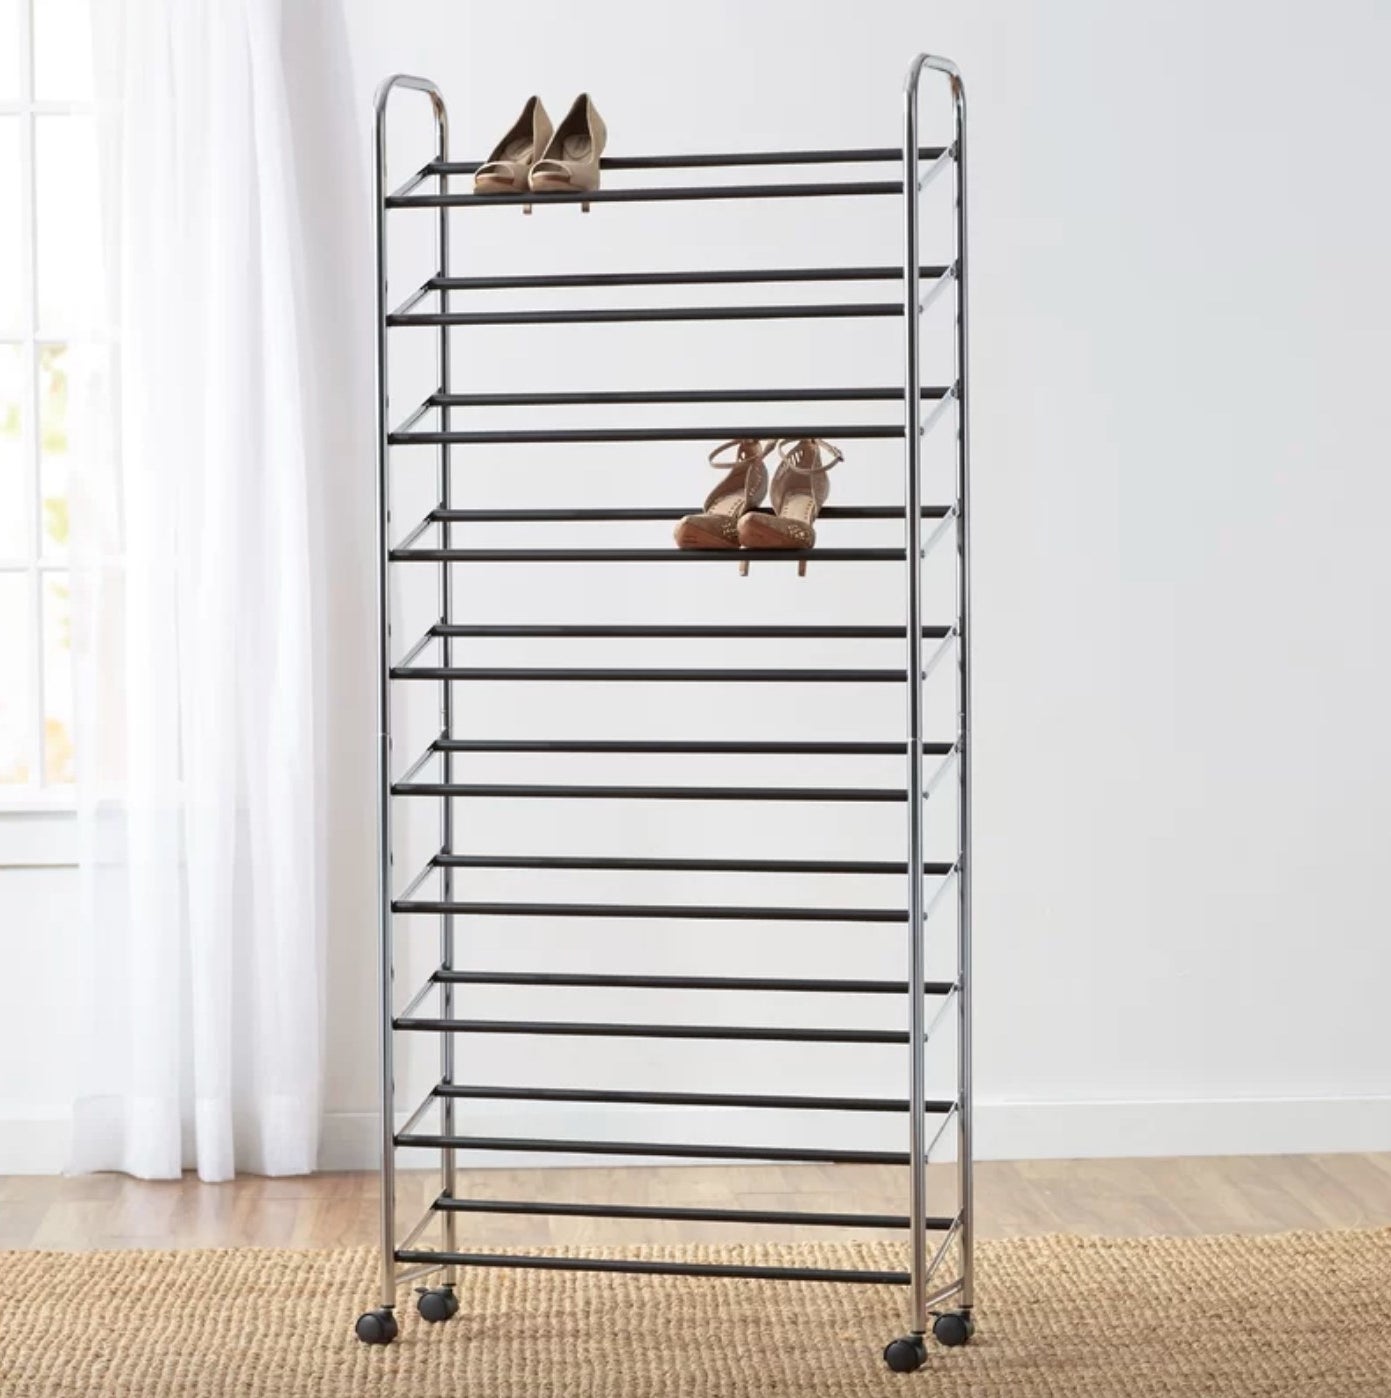 A 50 pair rolling shoe rack